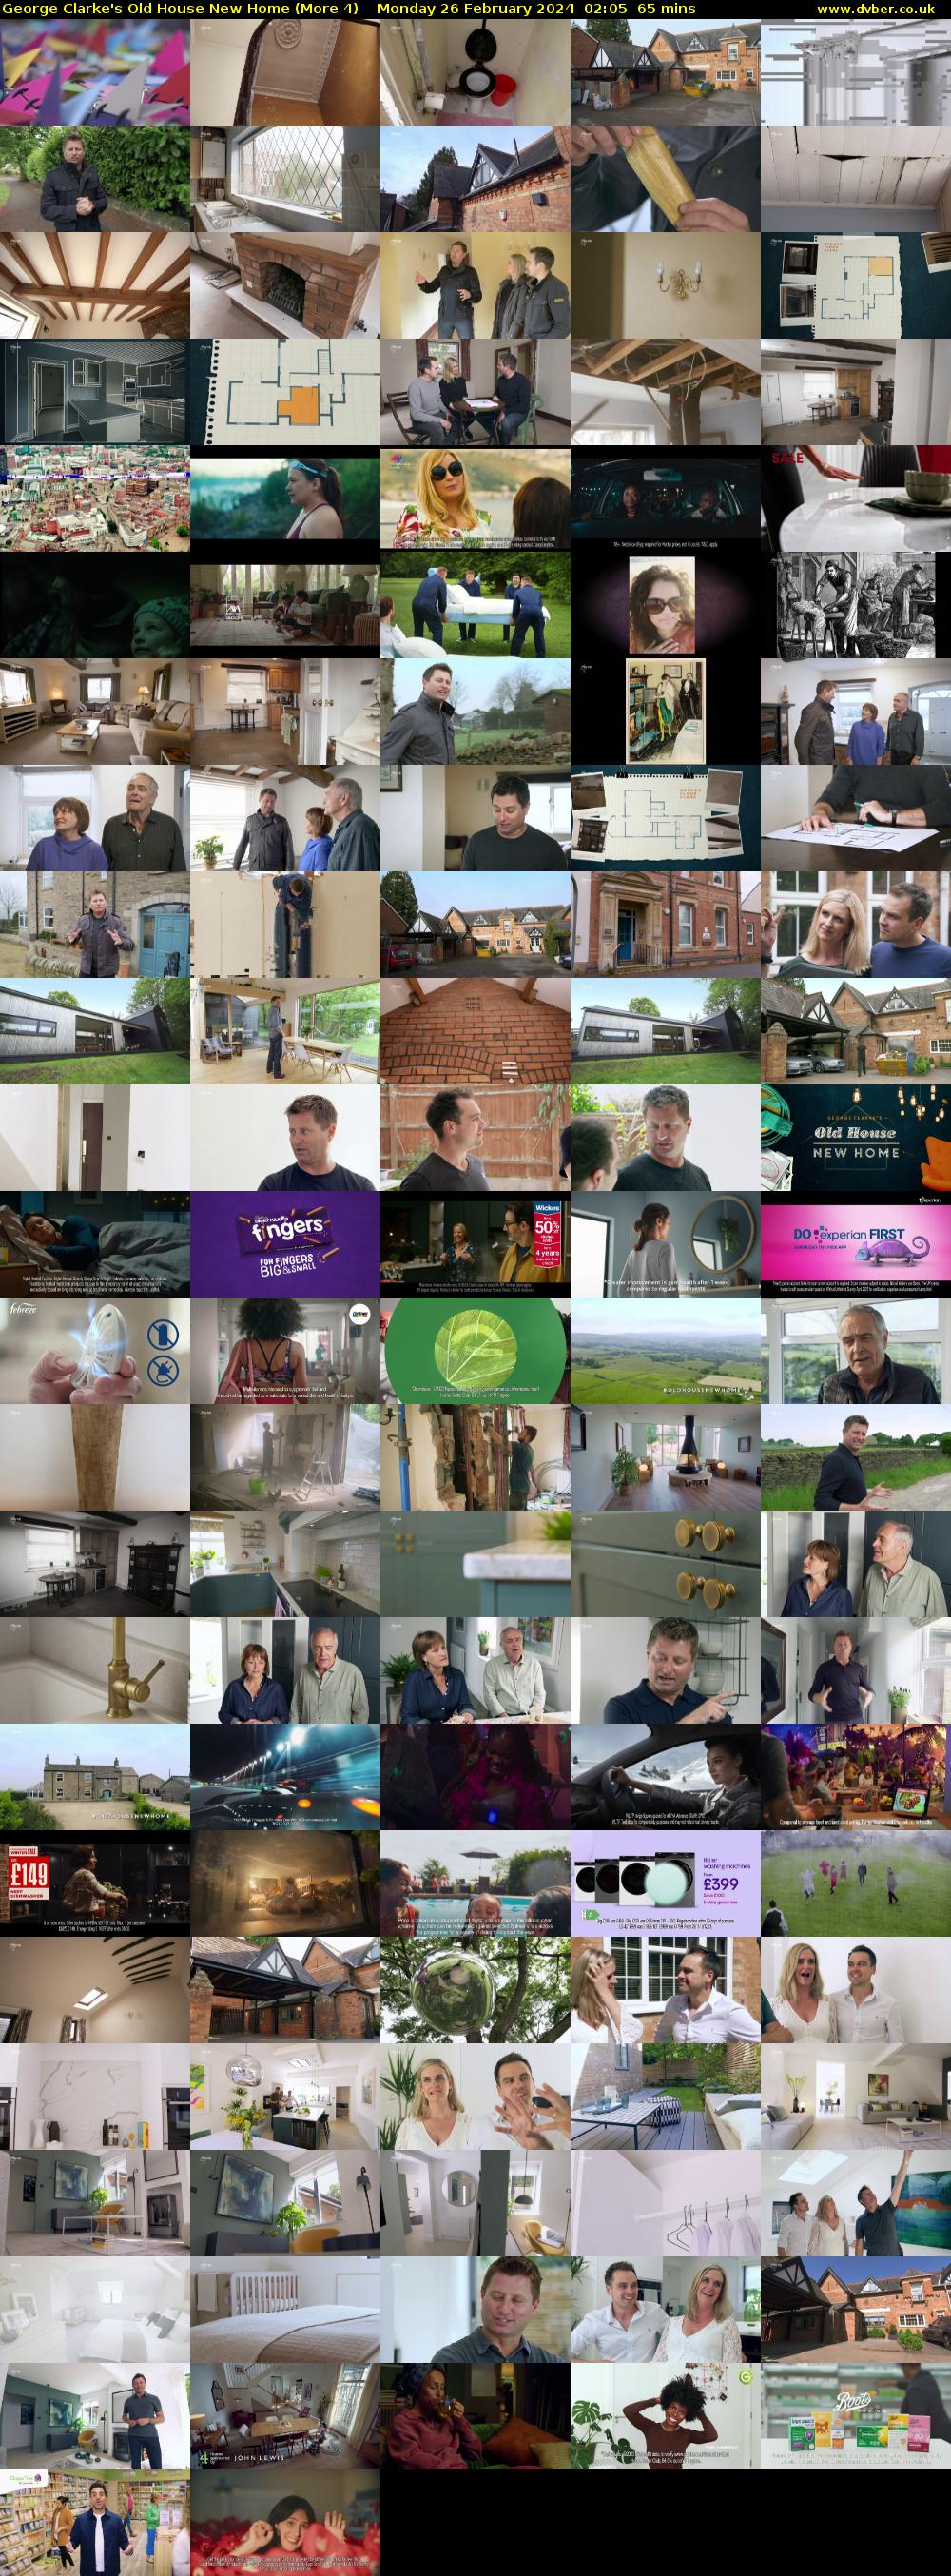 George Clarke's Old House New Home (More 4) Monday 26 February 2024 02:05 - 03:10